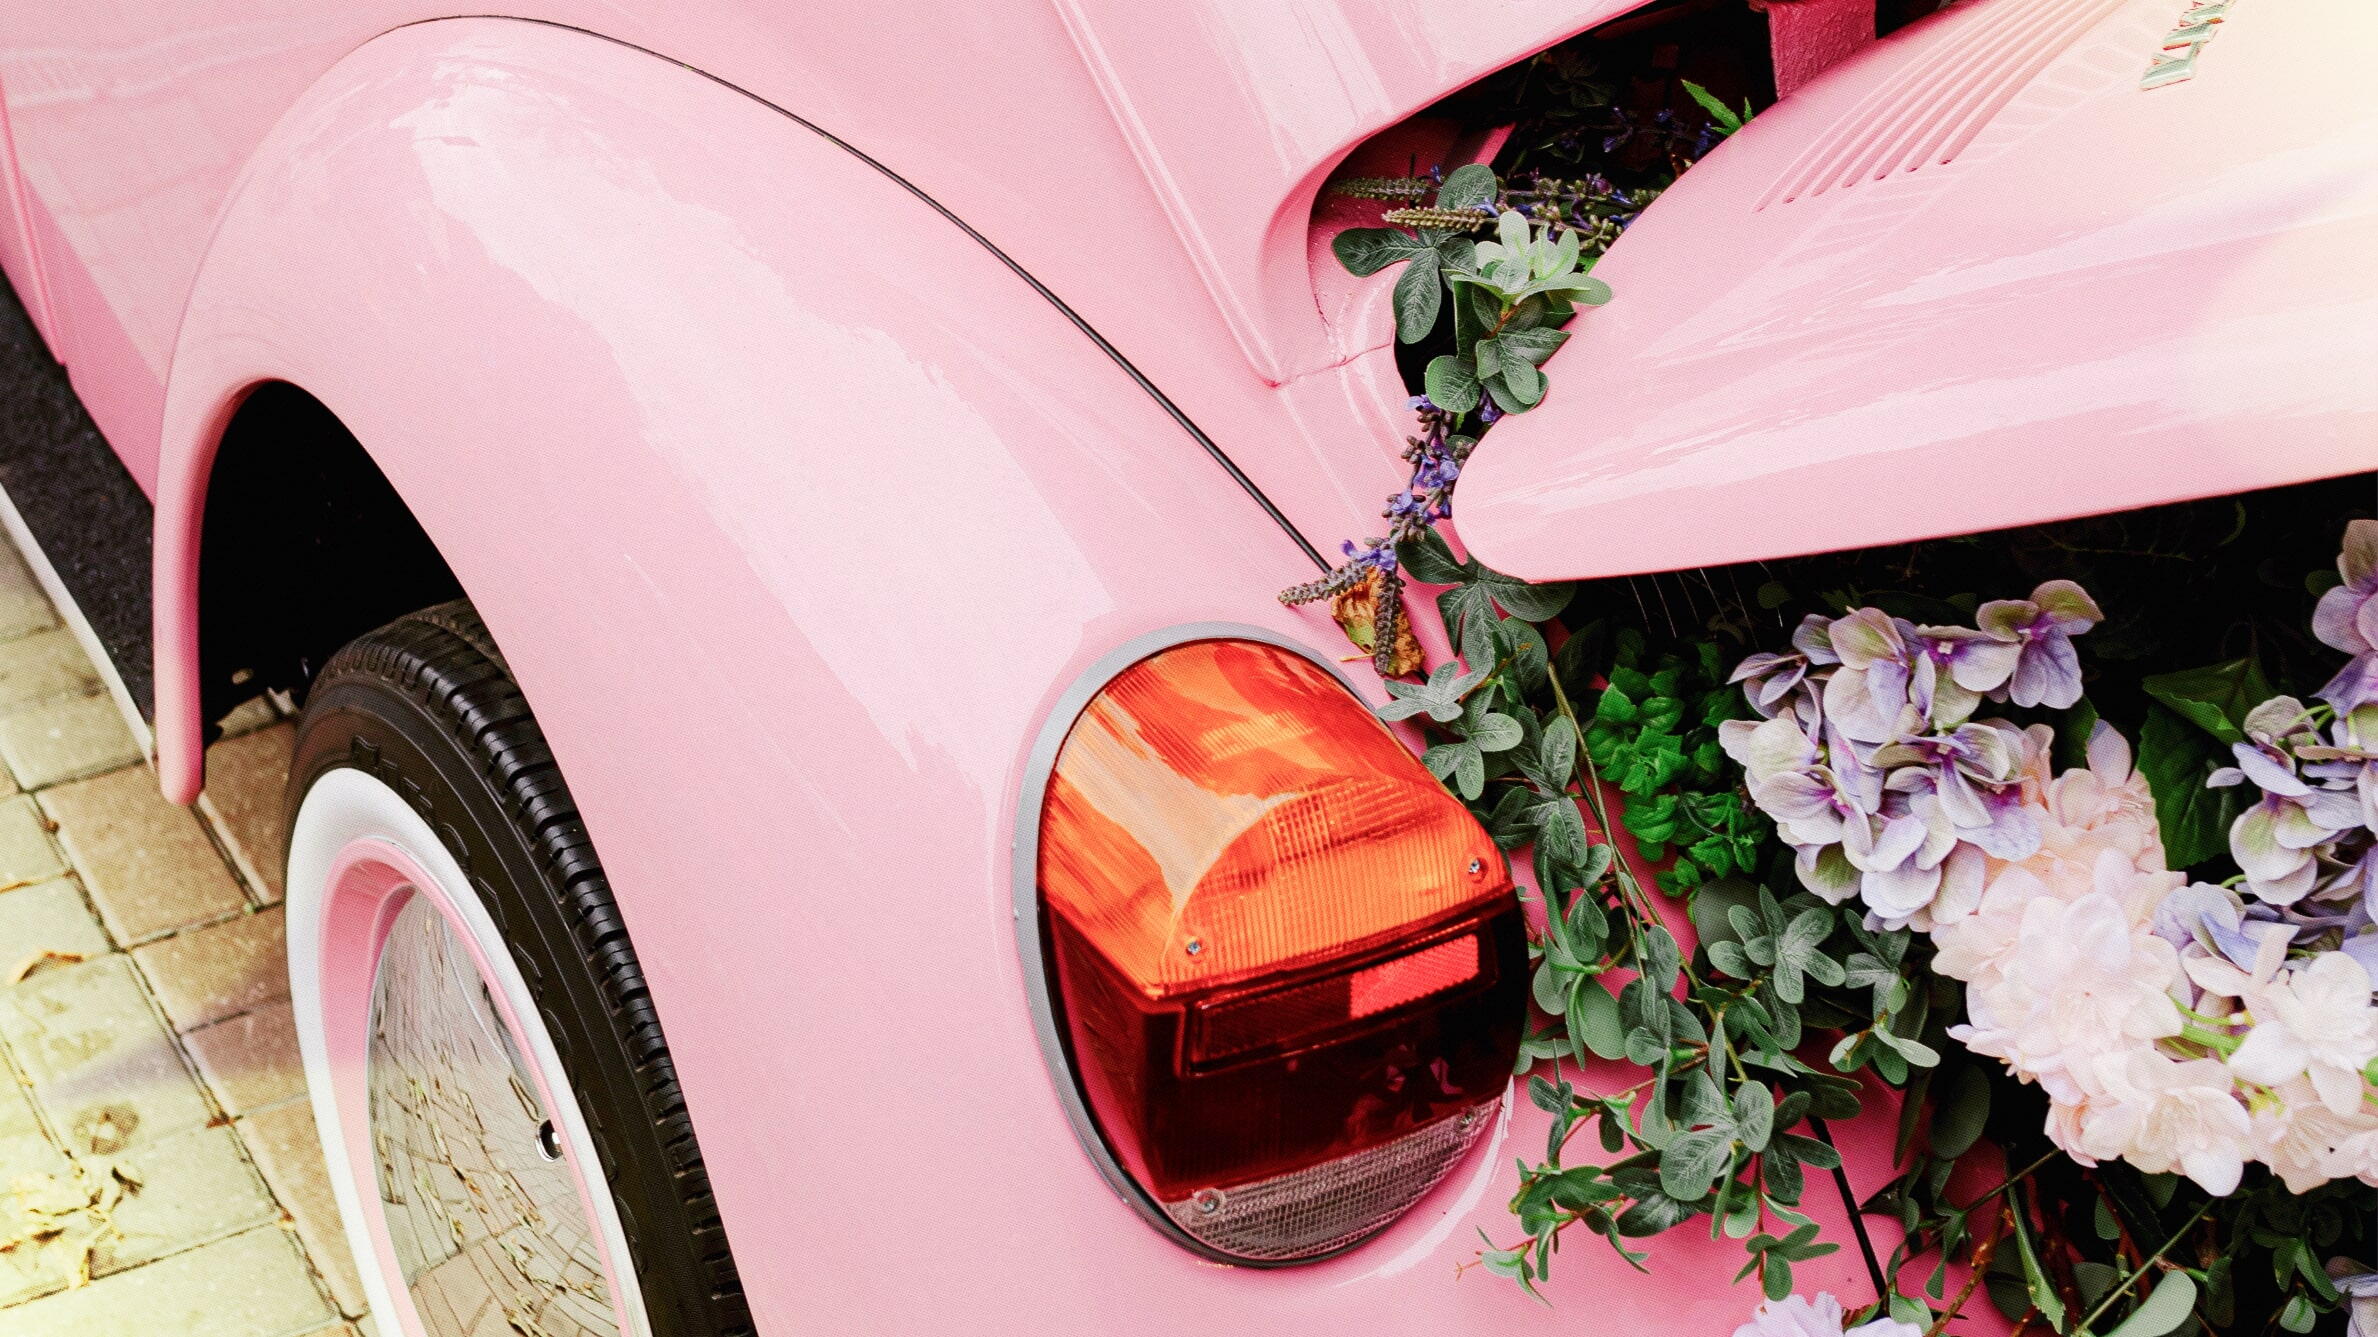 How long can flowers go without water in a car